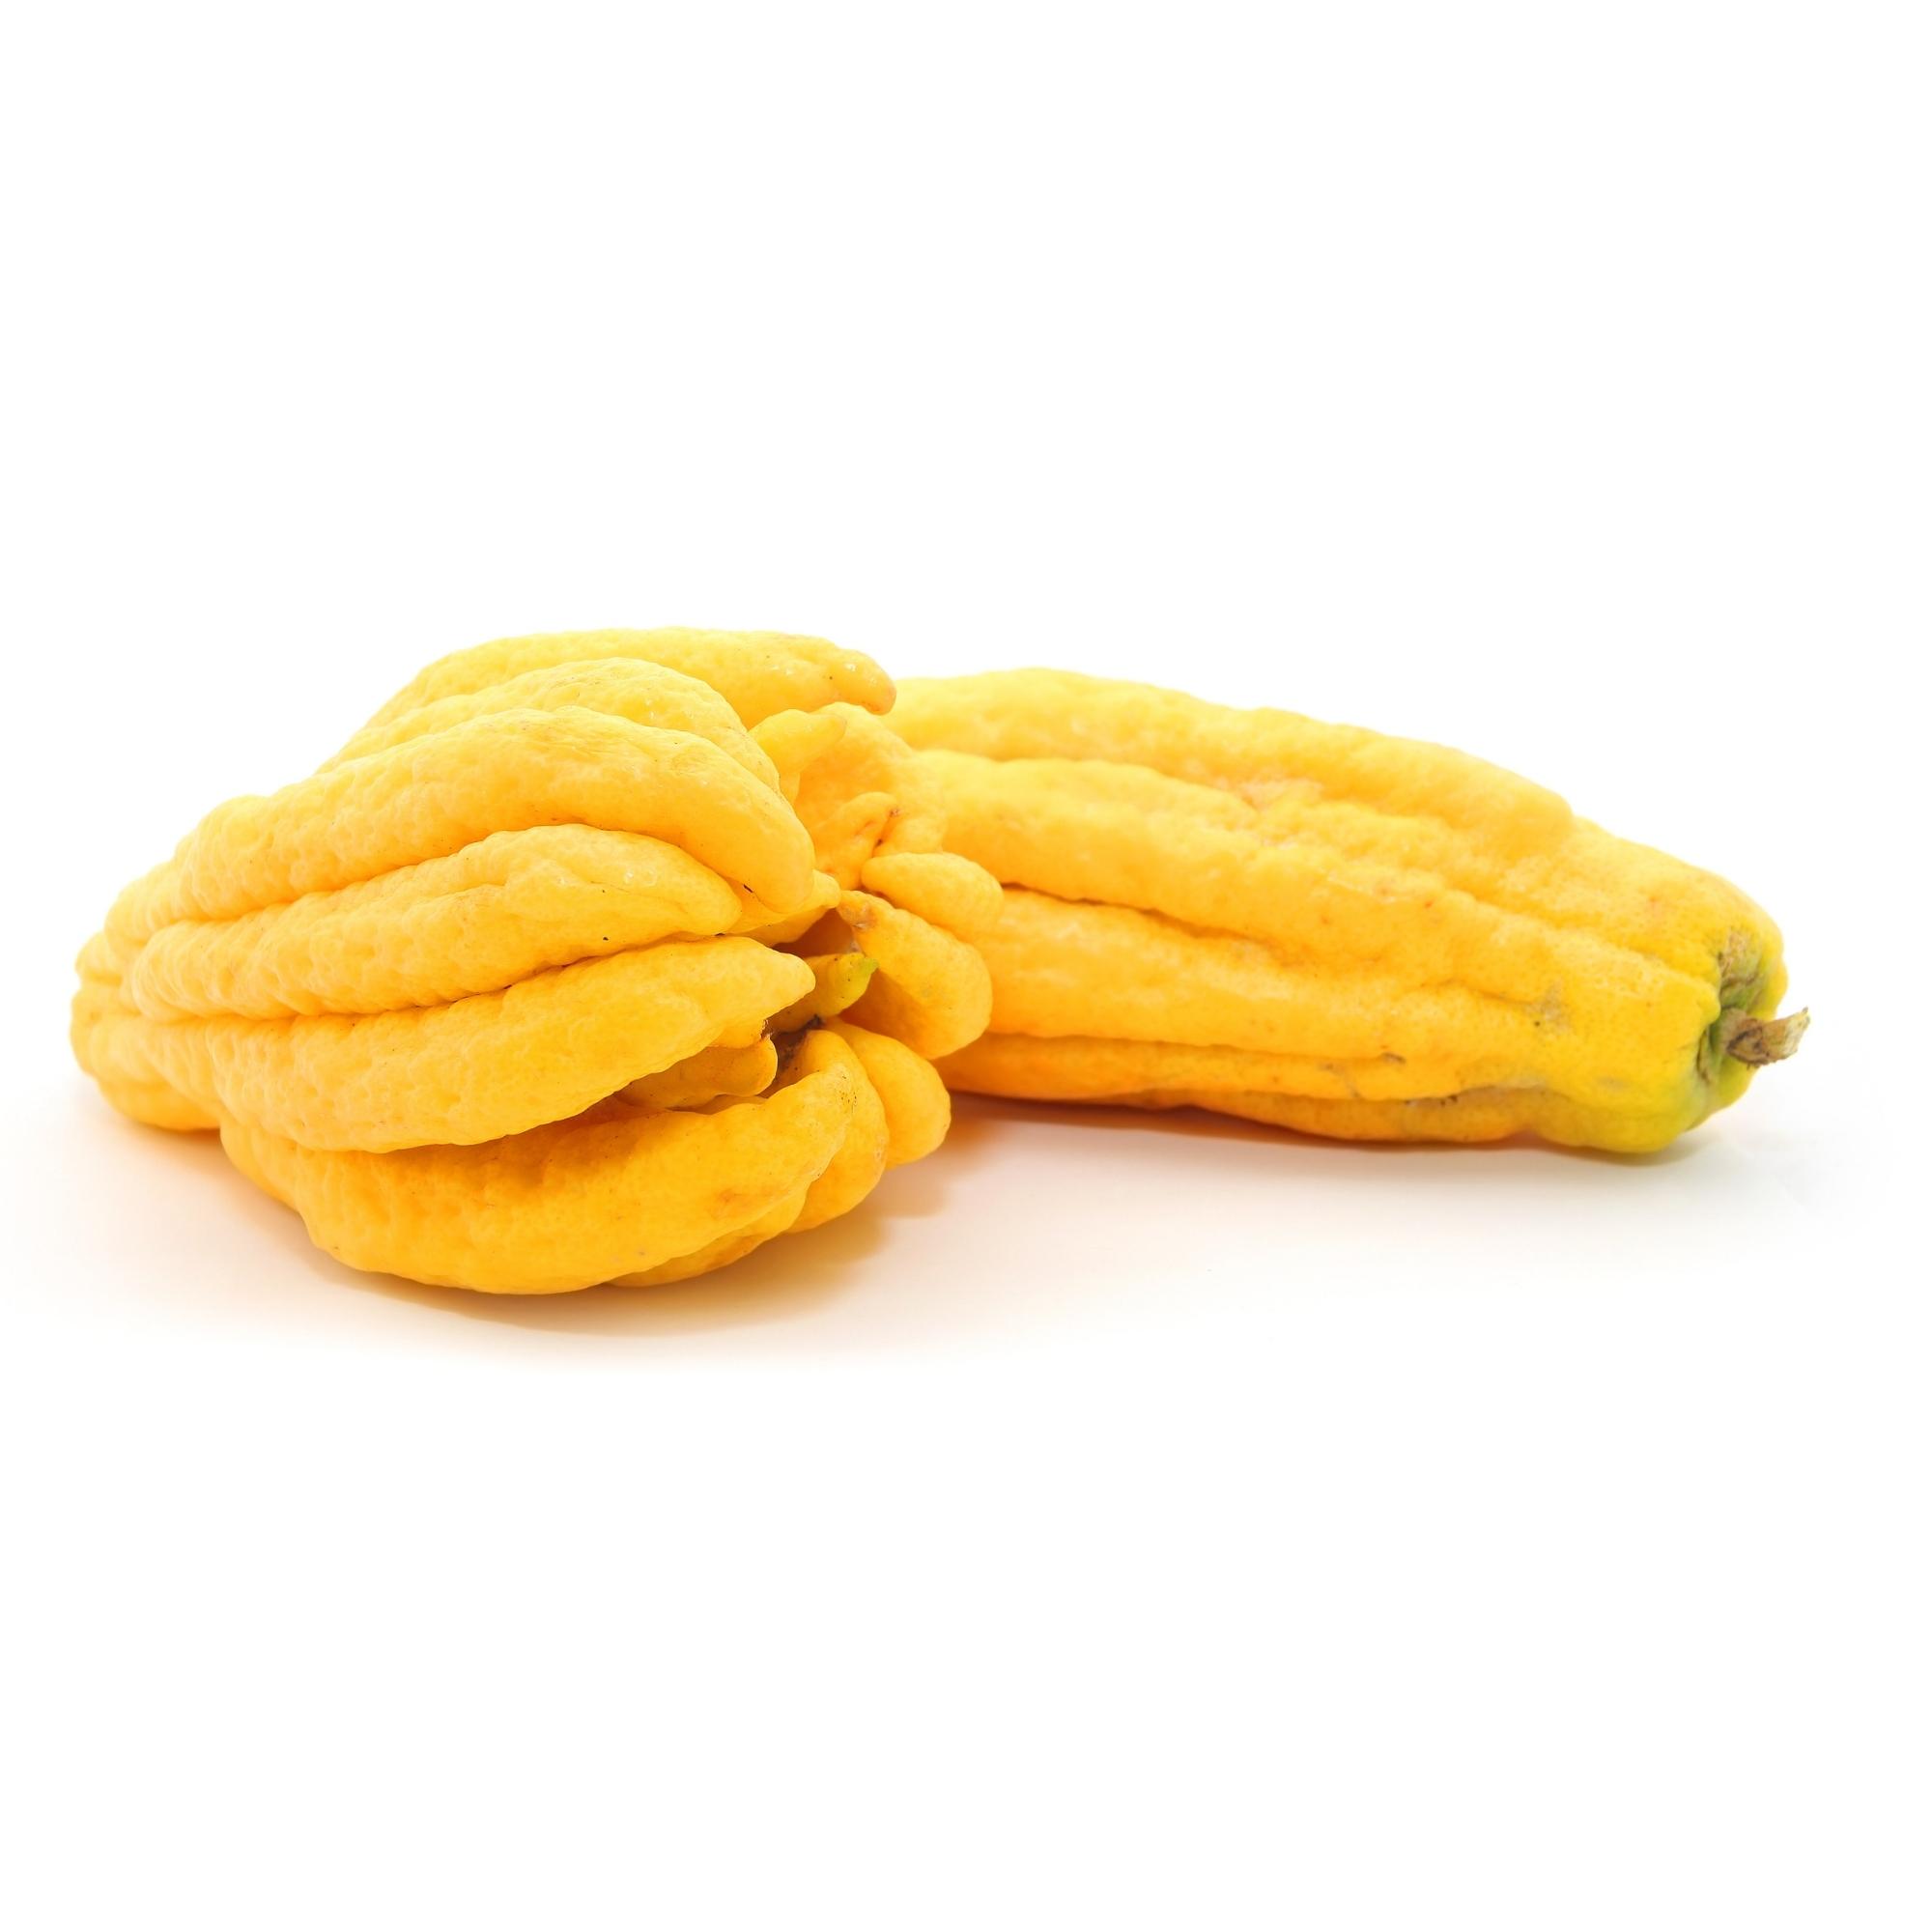 Bright yellow fruit that looks like fingers hanging down.